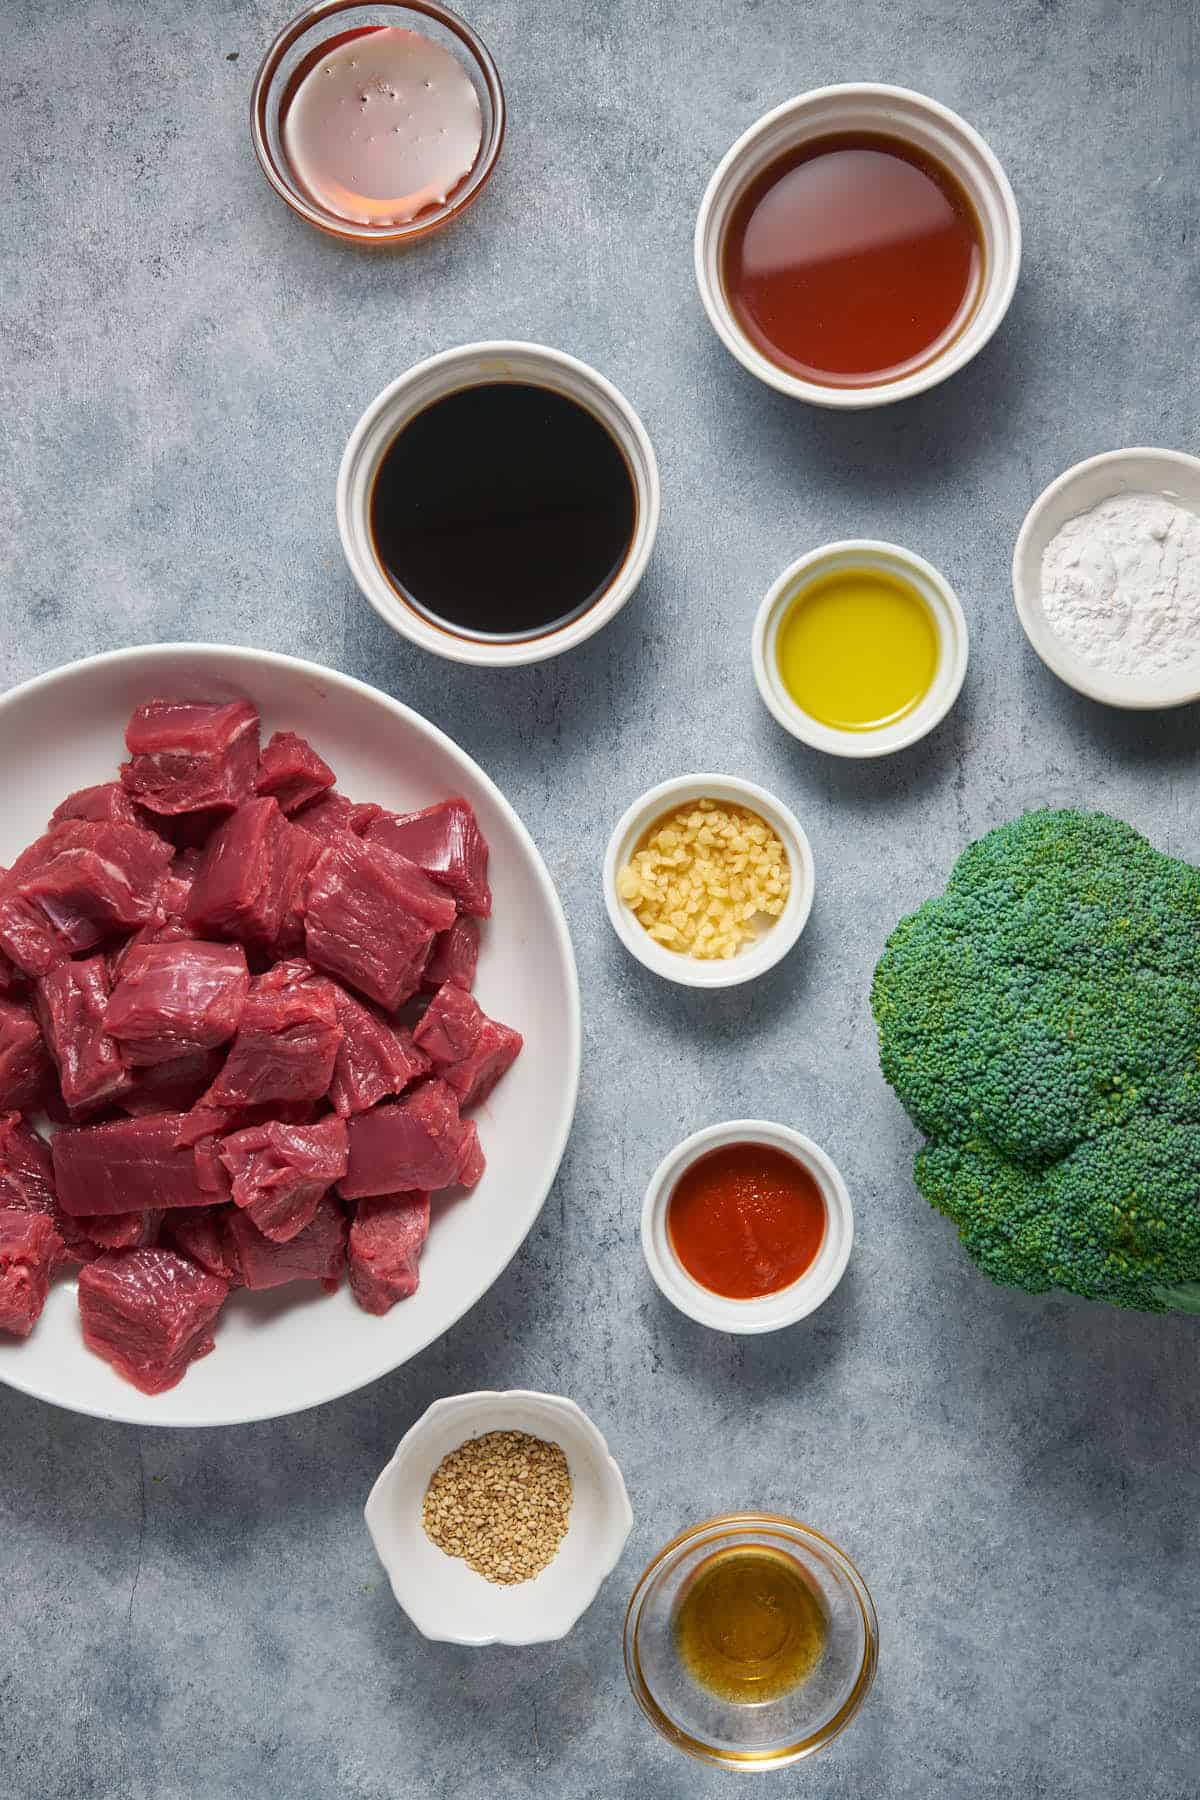 Ingredients to make air fryer beef and broccoli.